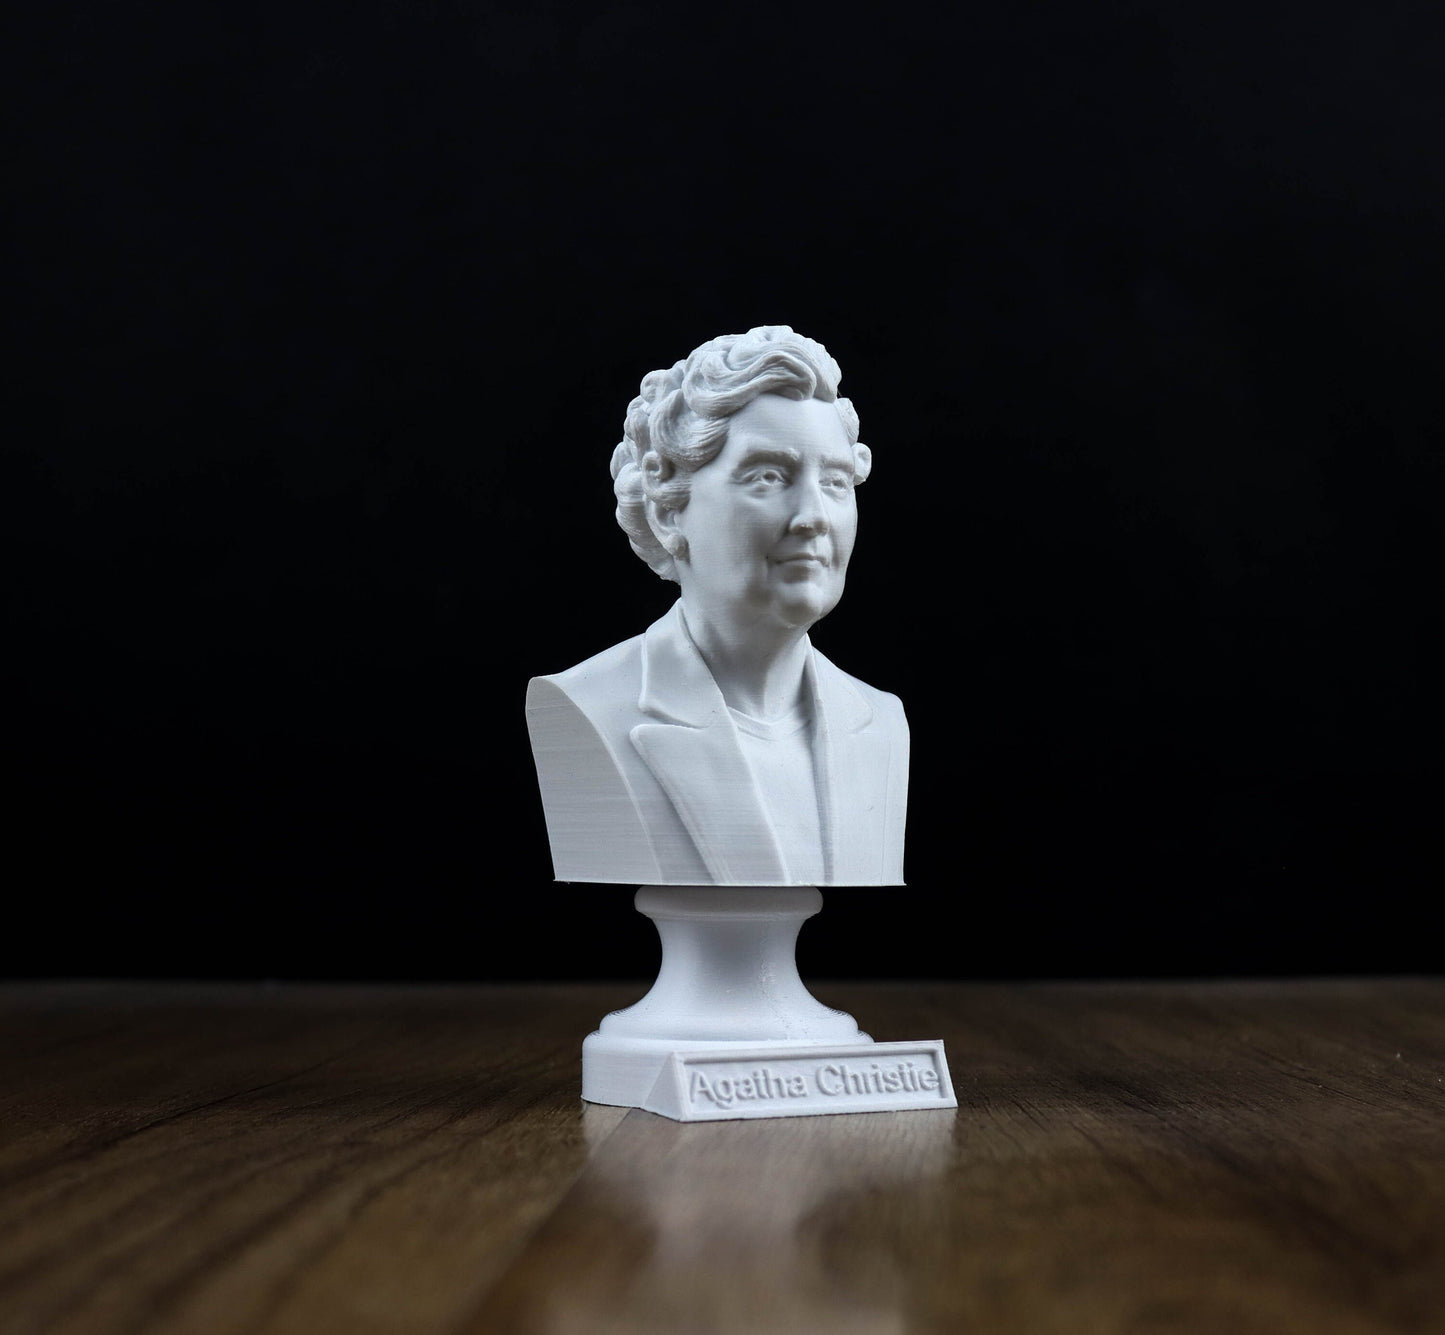 Agatha Christie Bust, English Writer Statue, Gift for Book Lover